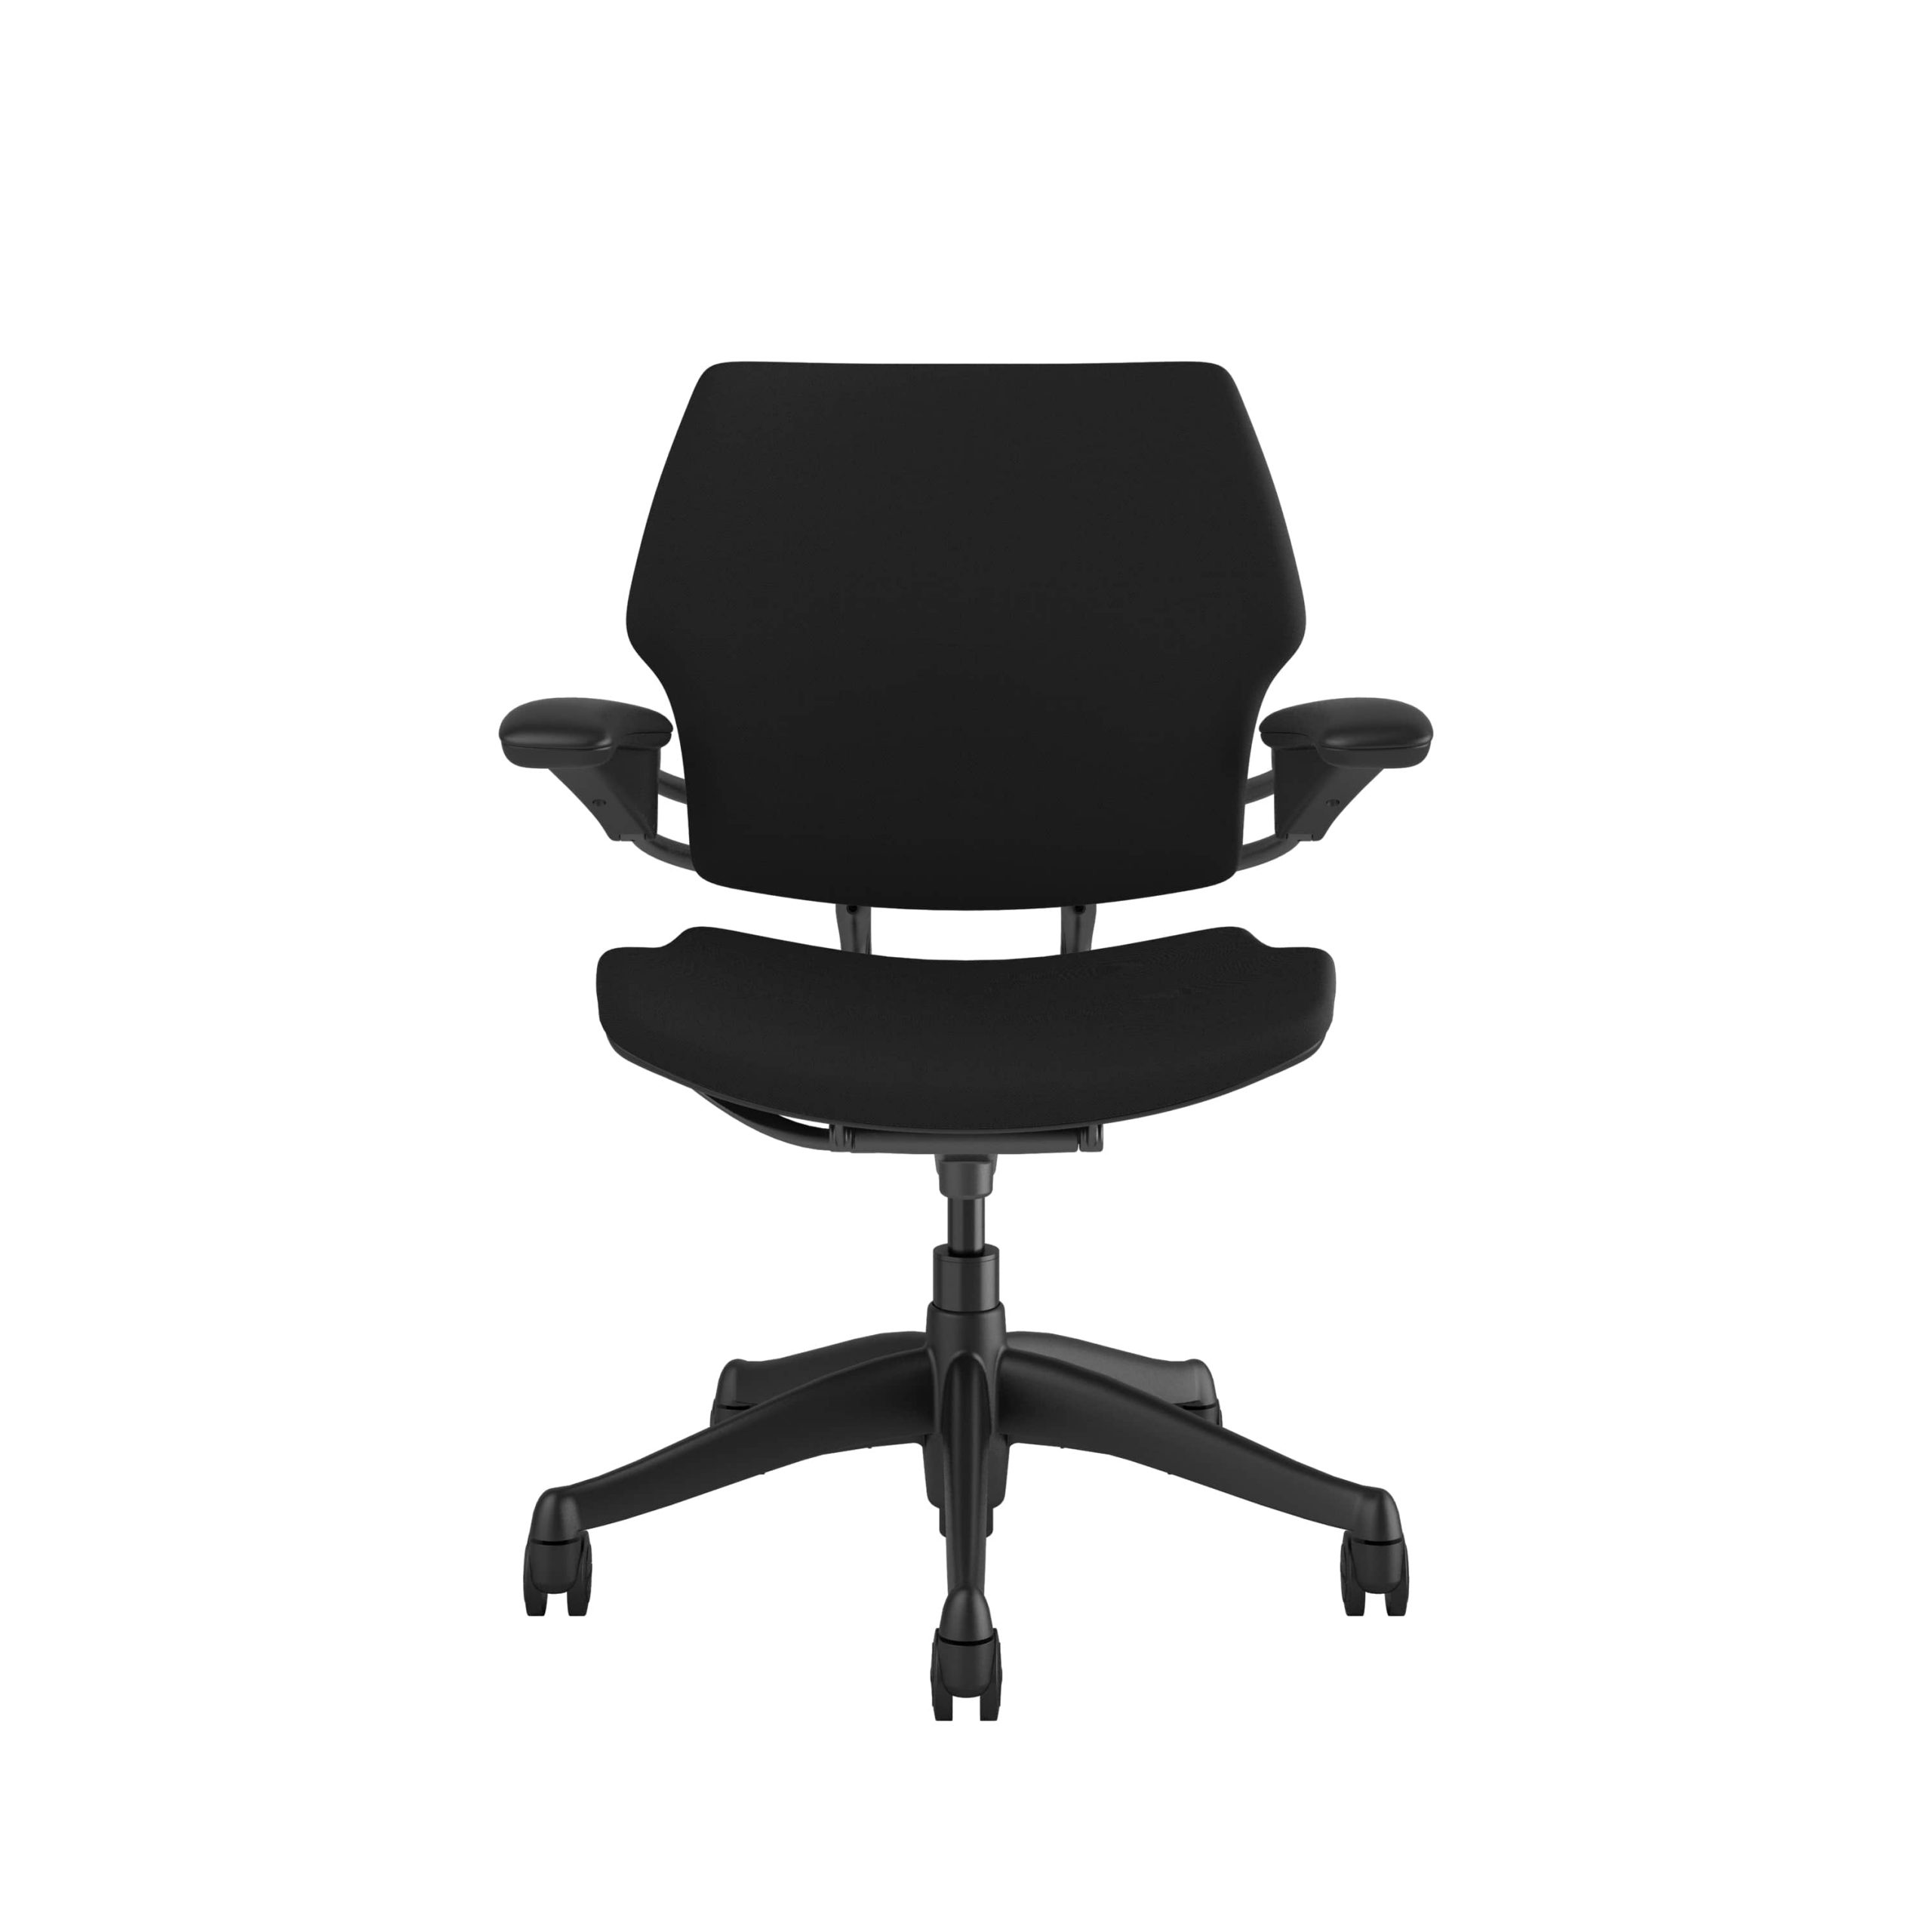 Buy Humanscale Ergonomic Products Online In India